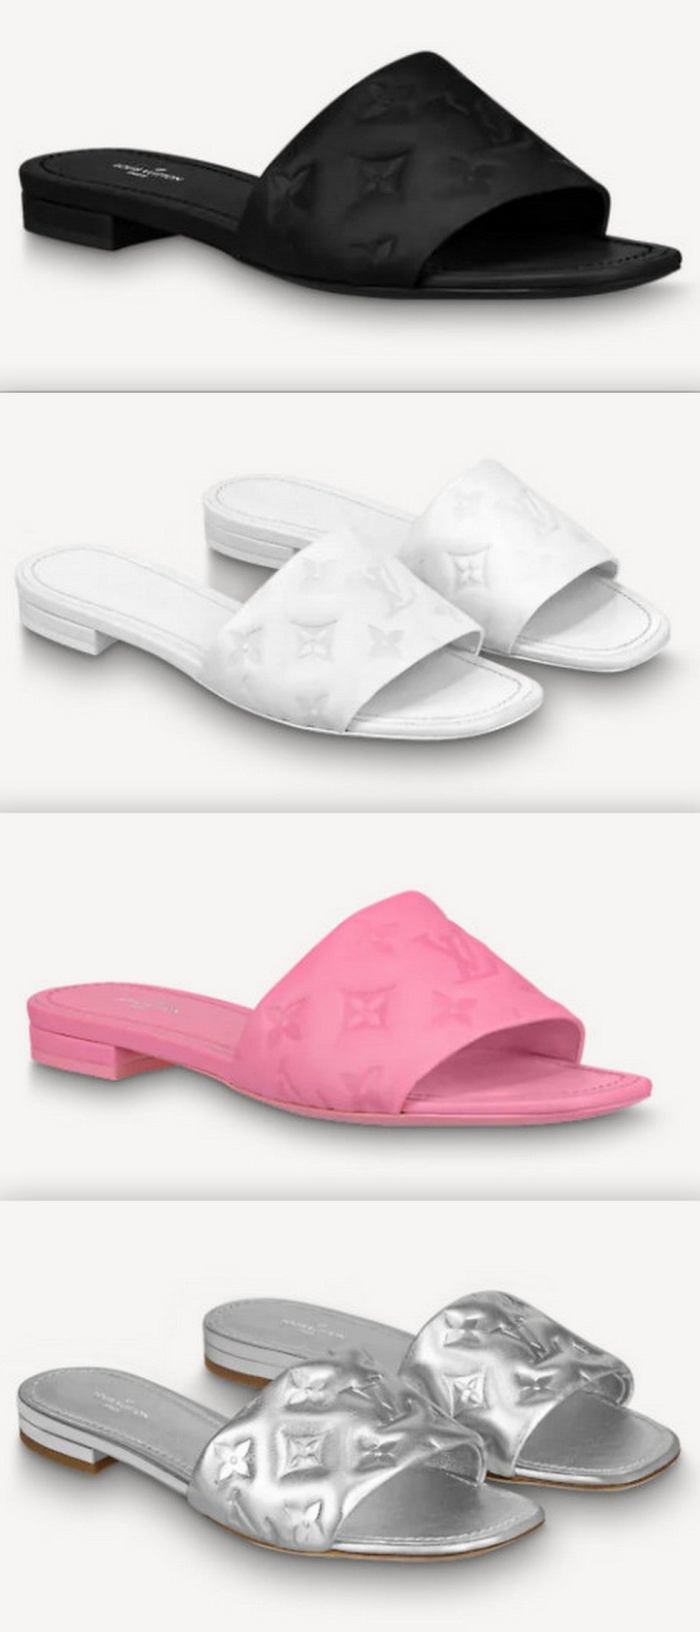 'Revival' Leather Monogram Flat Mules - Black, White, Pink, Silver